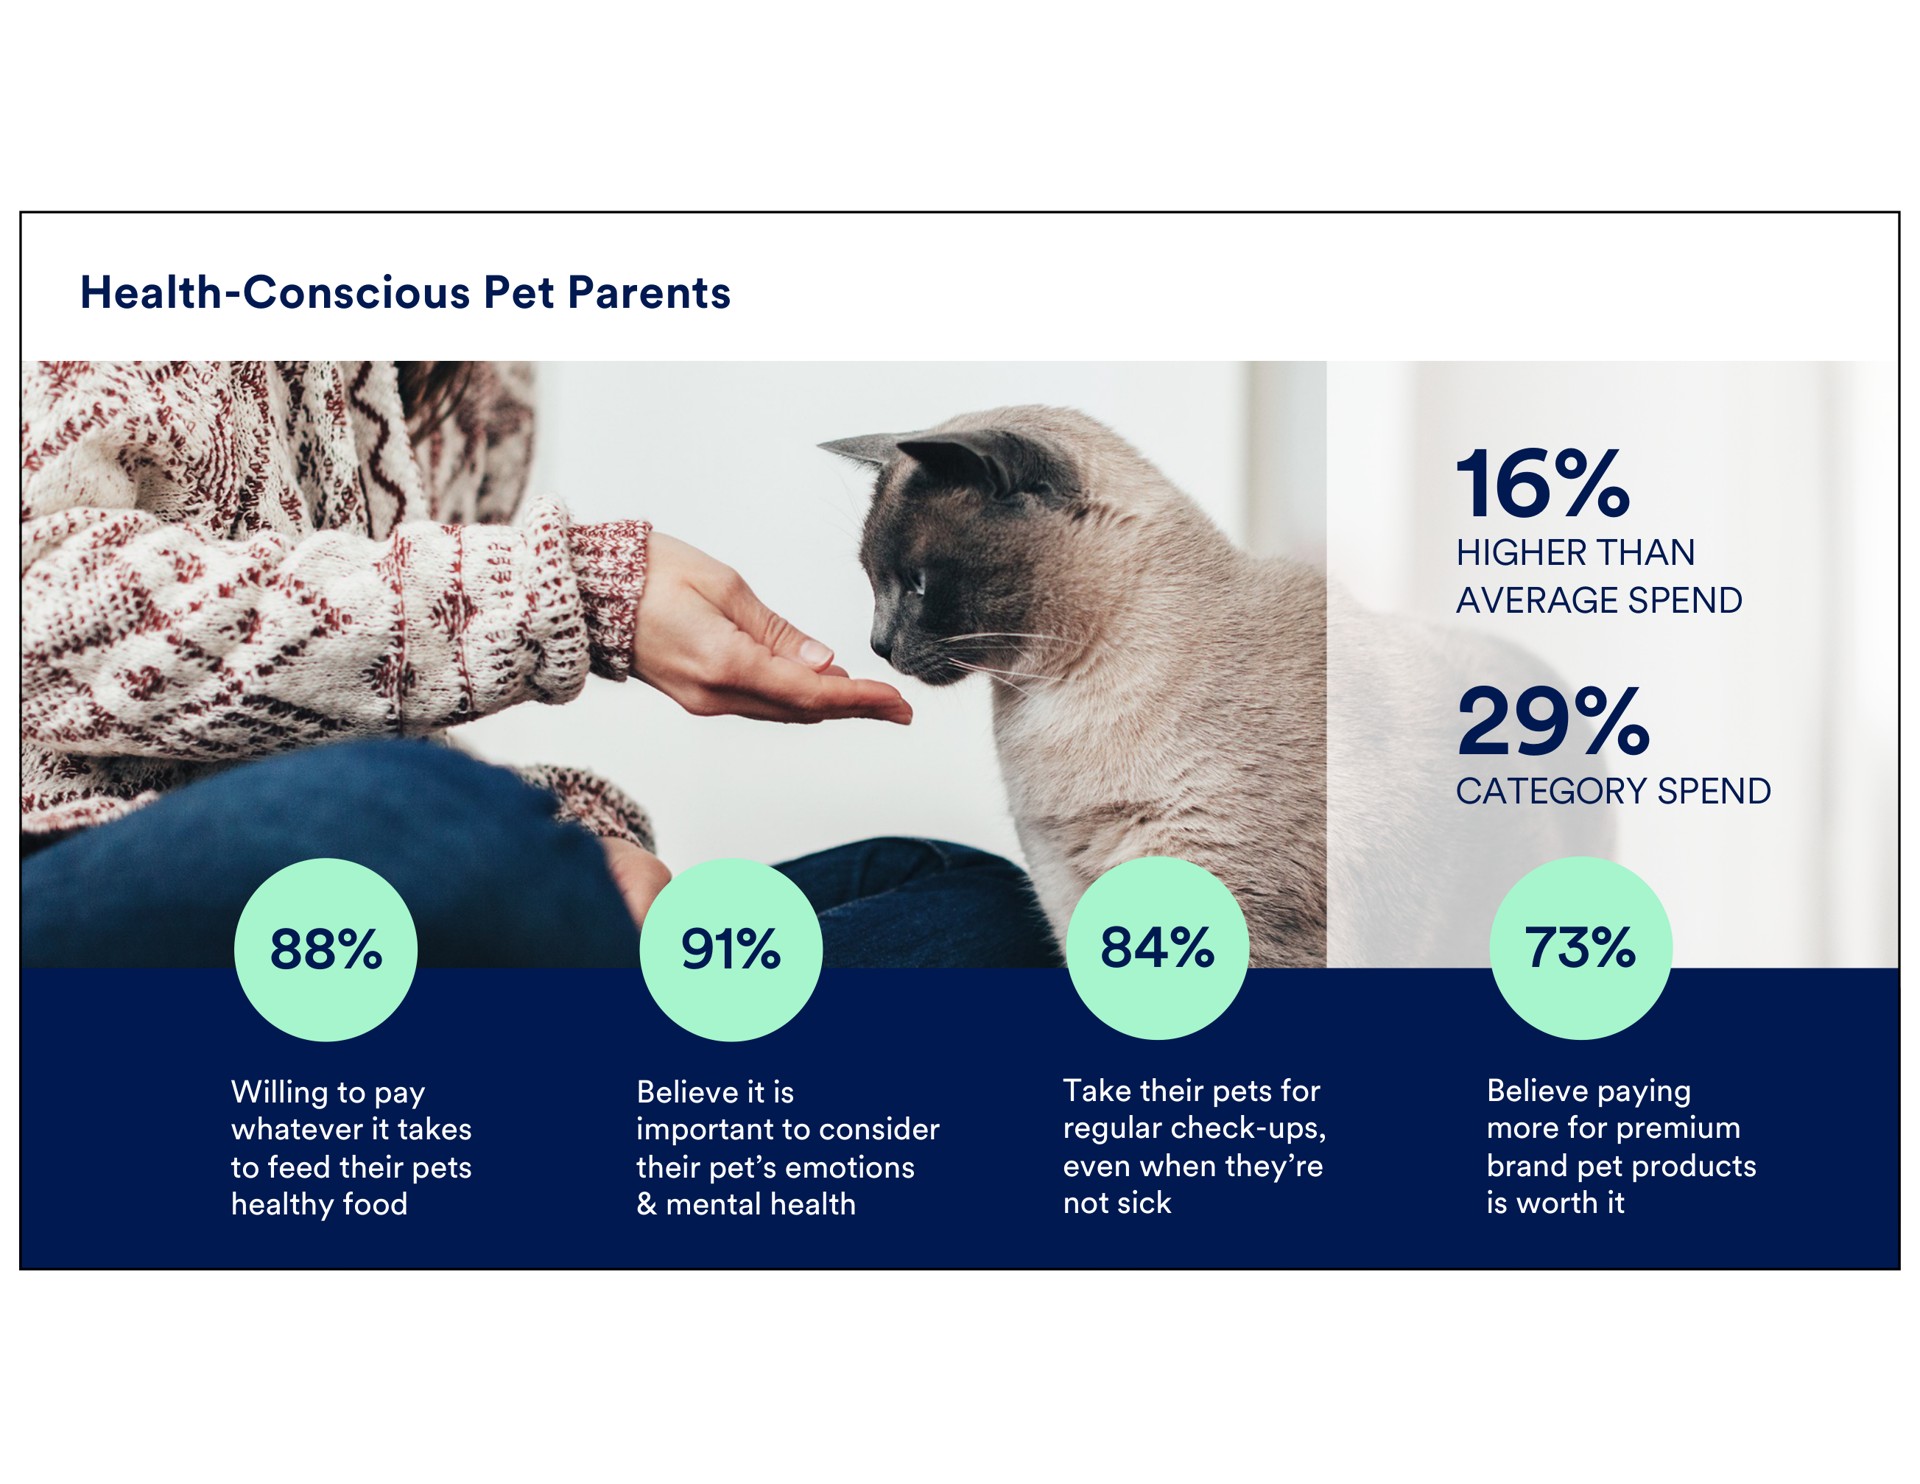 health conscious pet parents higher than average spend is worth it believe it is important to consider their emotions mental health take their pets for regular check ups not sick willing to pay whatever it takes to feed their pets healthy food believe paying more for premium brand products category spend | Petco